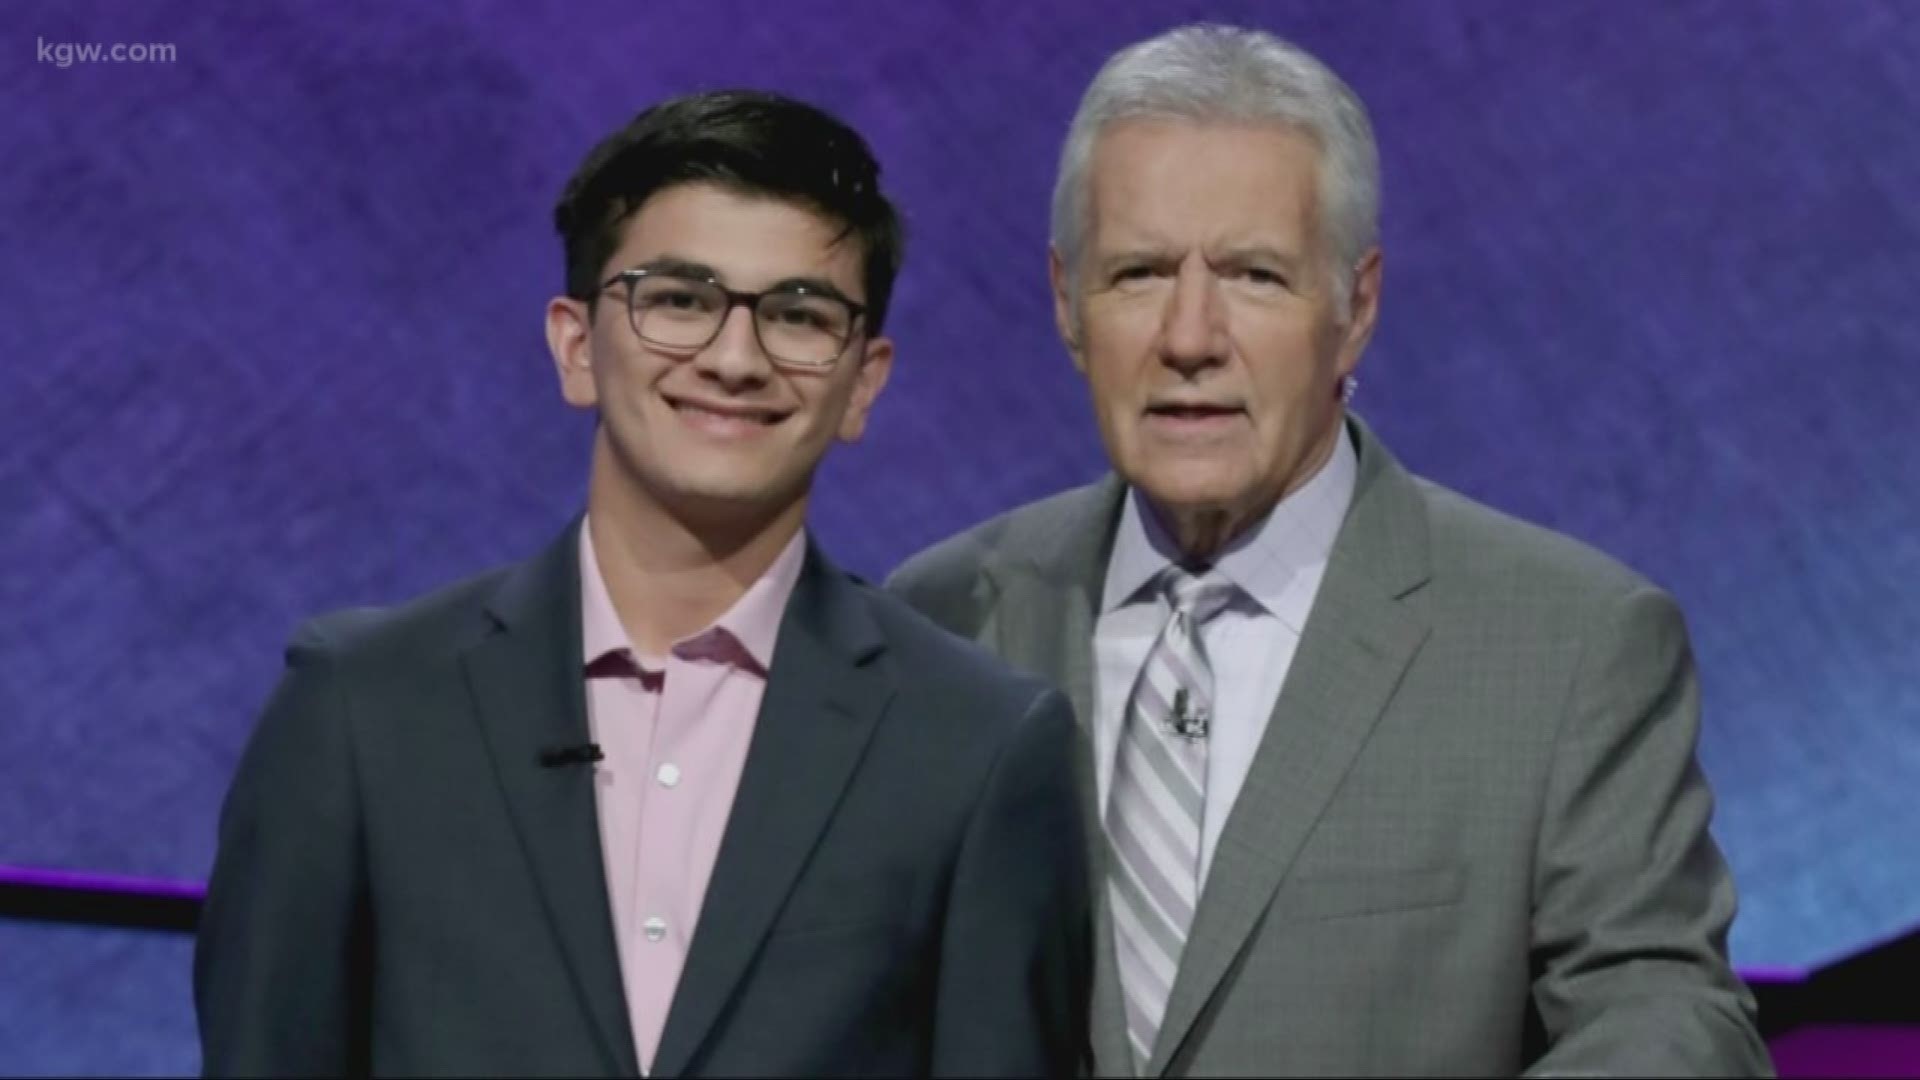 Portland’s Jeopardy champion, Avi Gupta, made a donation of over $10,000 to OHSU’s Knight Cancer Institute in honor of Alex Trebek.